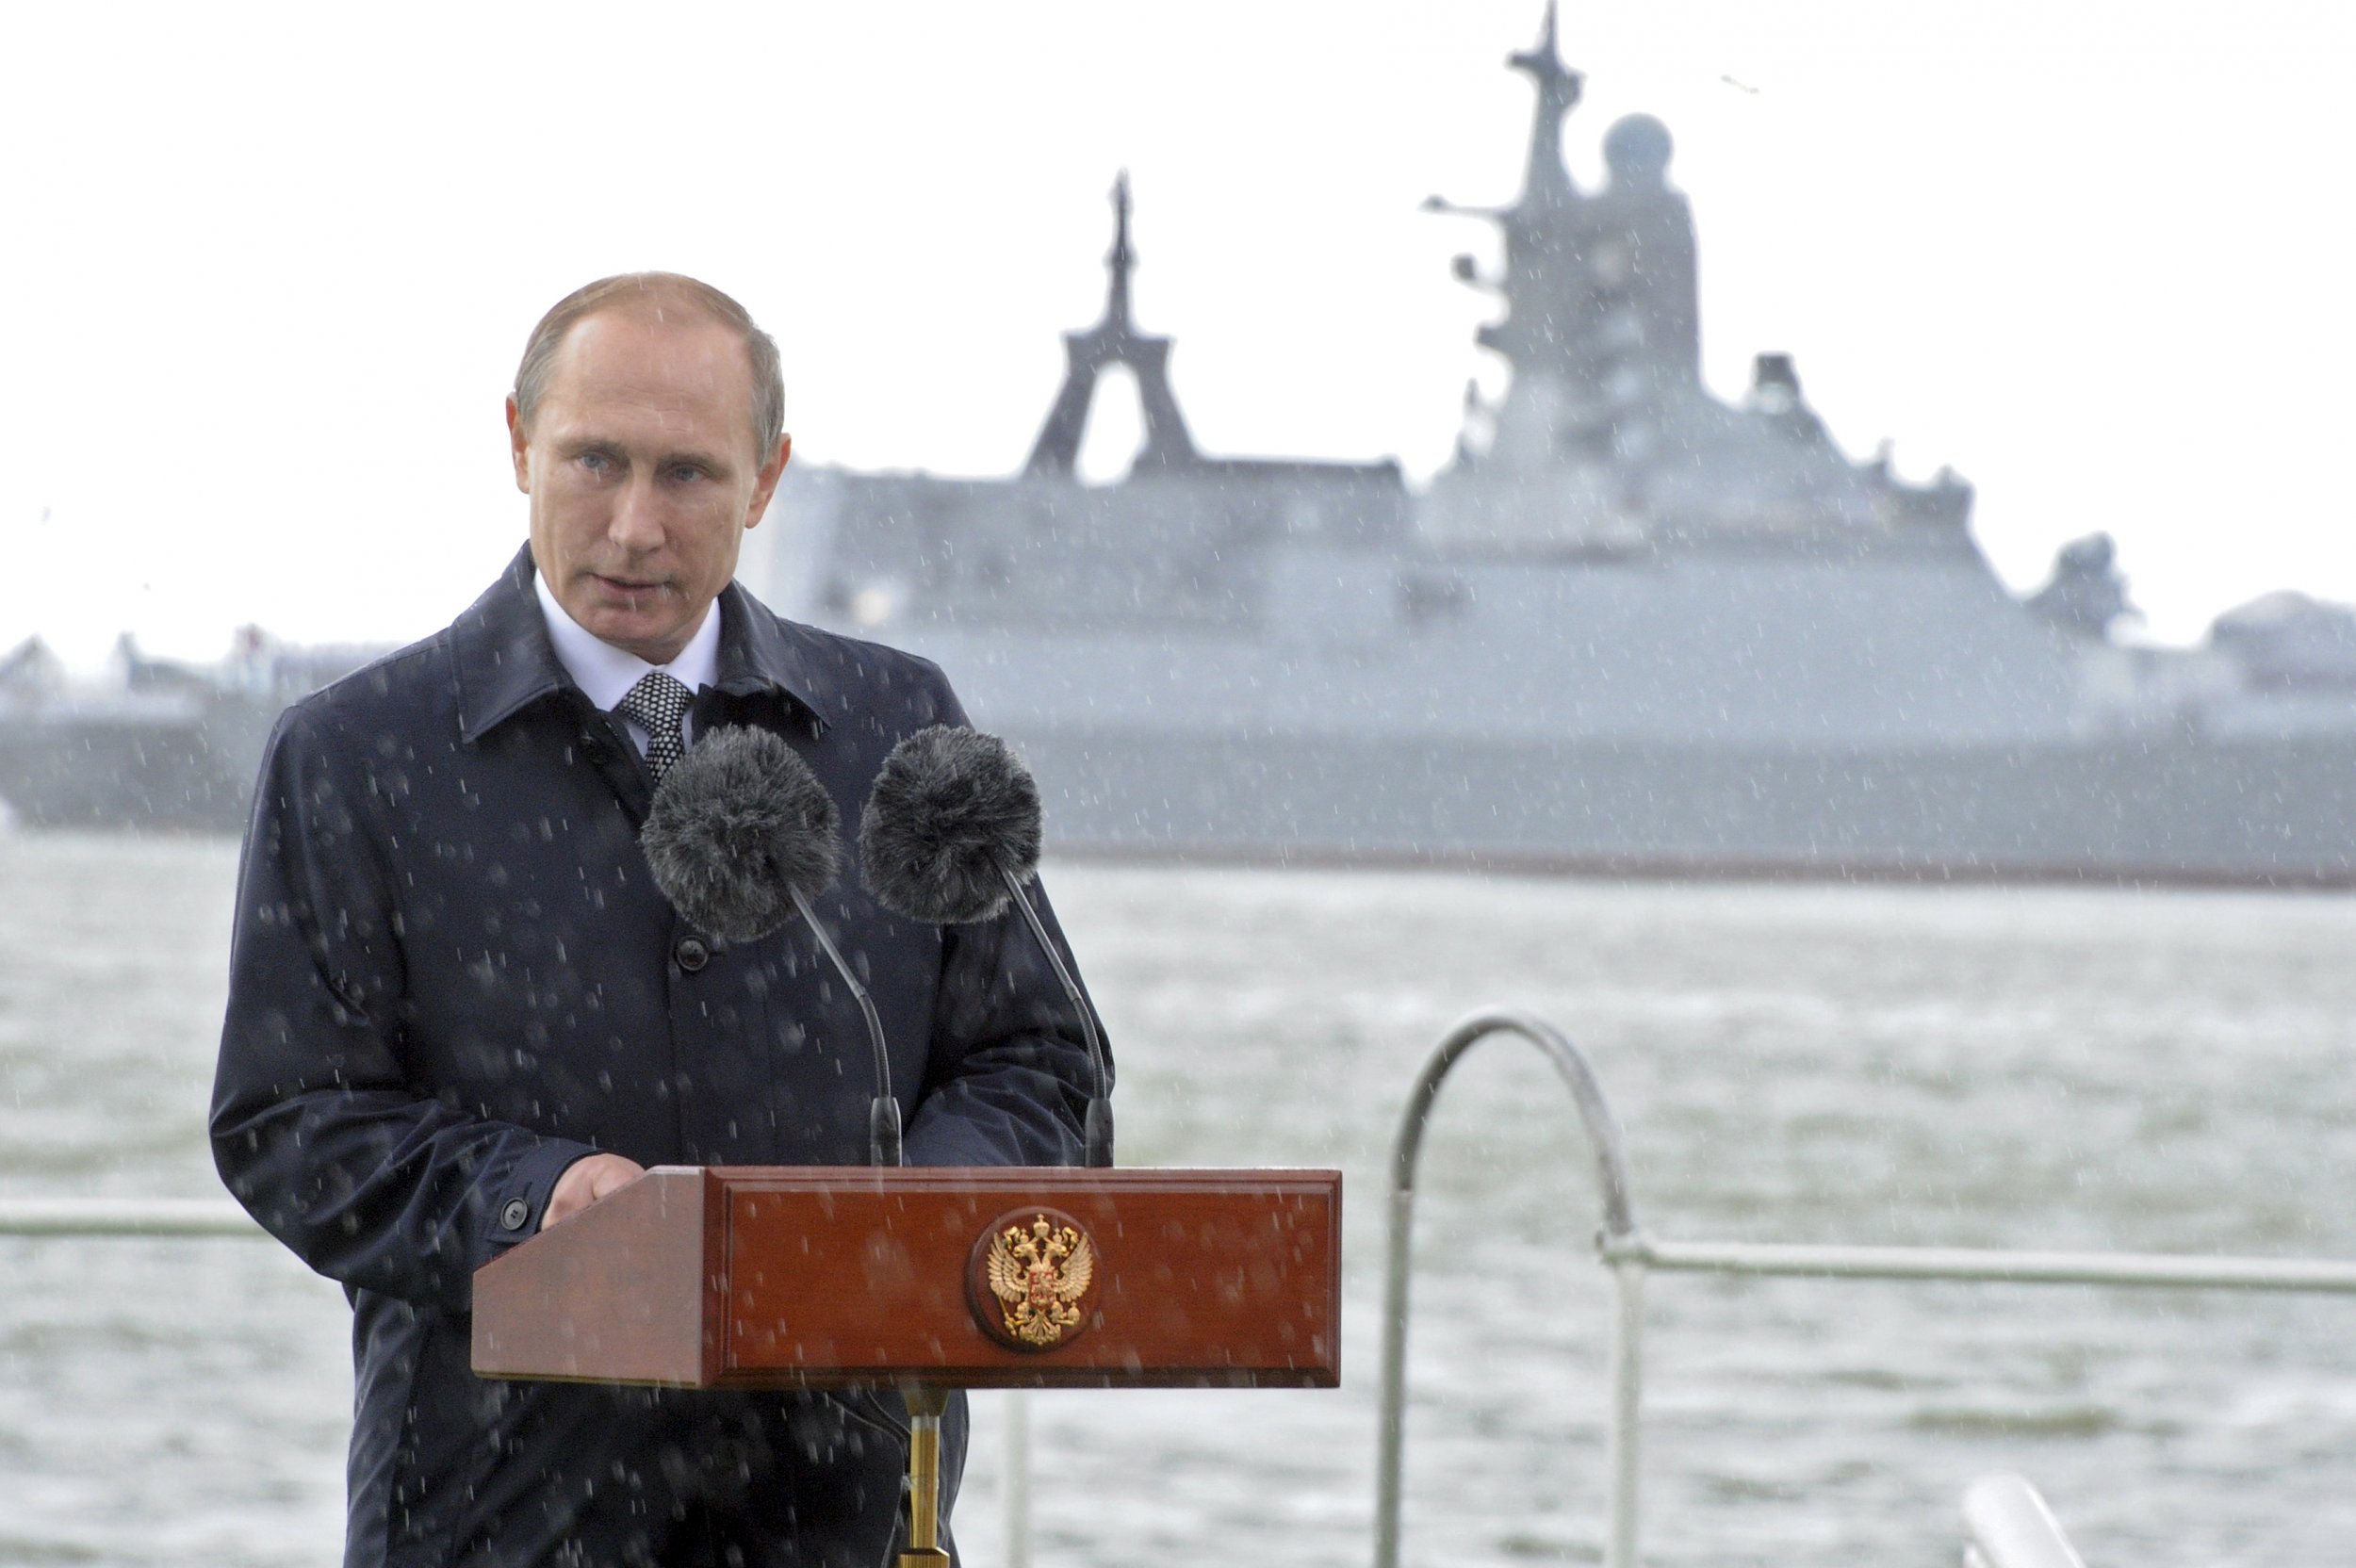 Putin speaks in front of a Russian warship